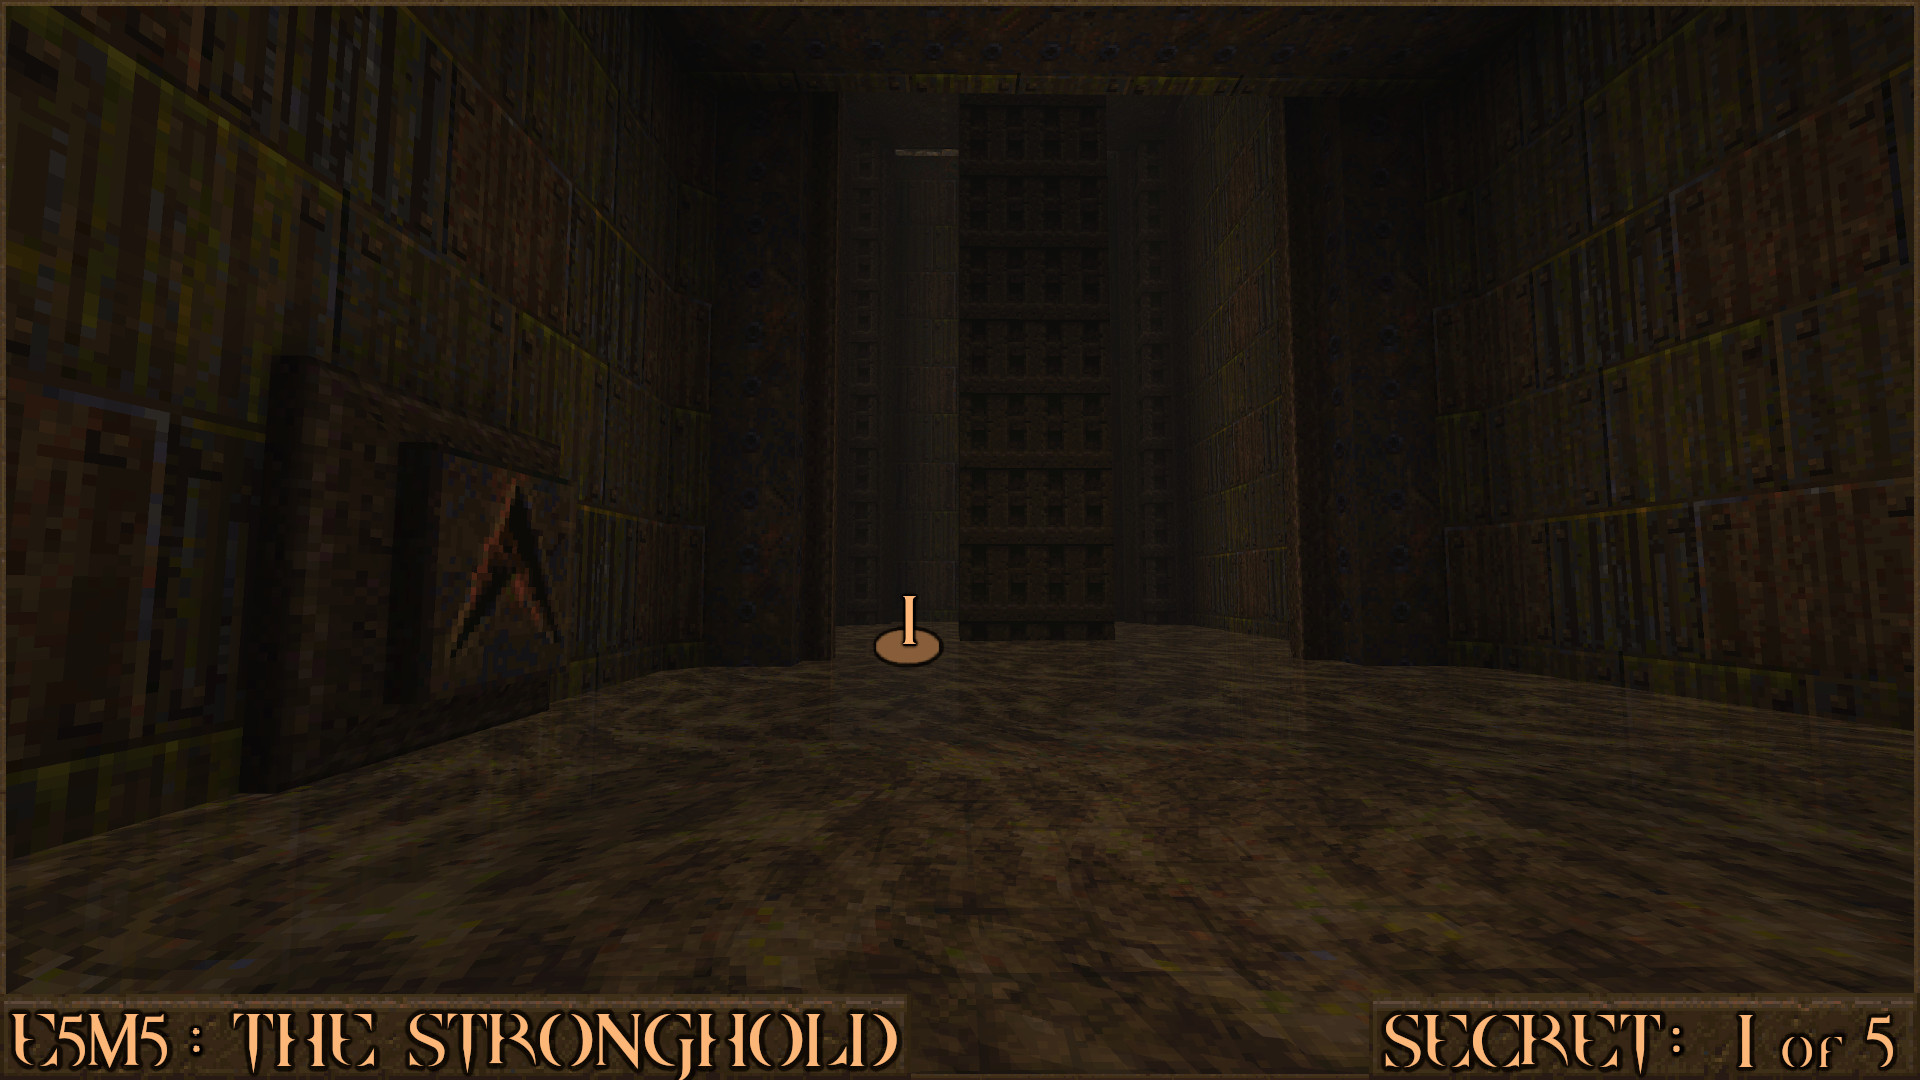 Quake Finding All Secrets in Quake Expansion pack: Dimension of the Past - E5M5: The Stronghold - 9B7B1B2